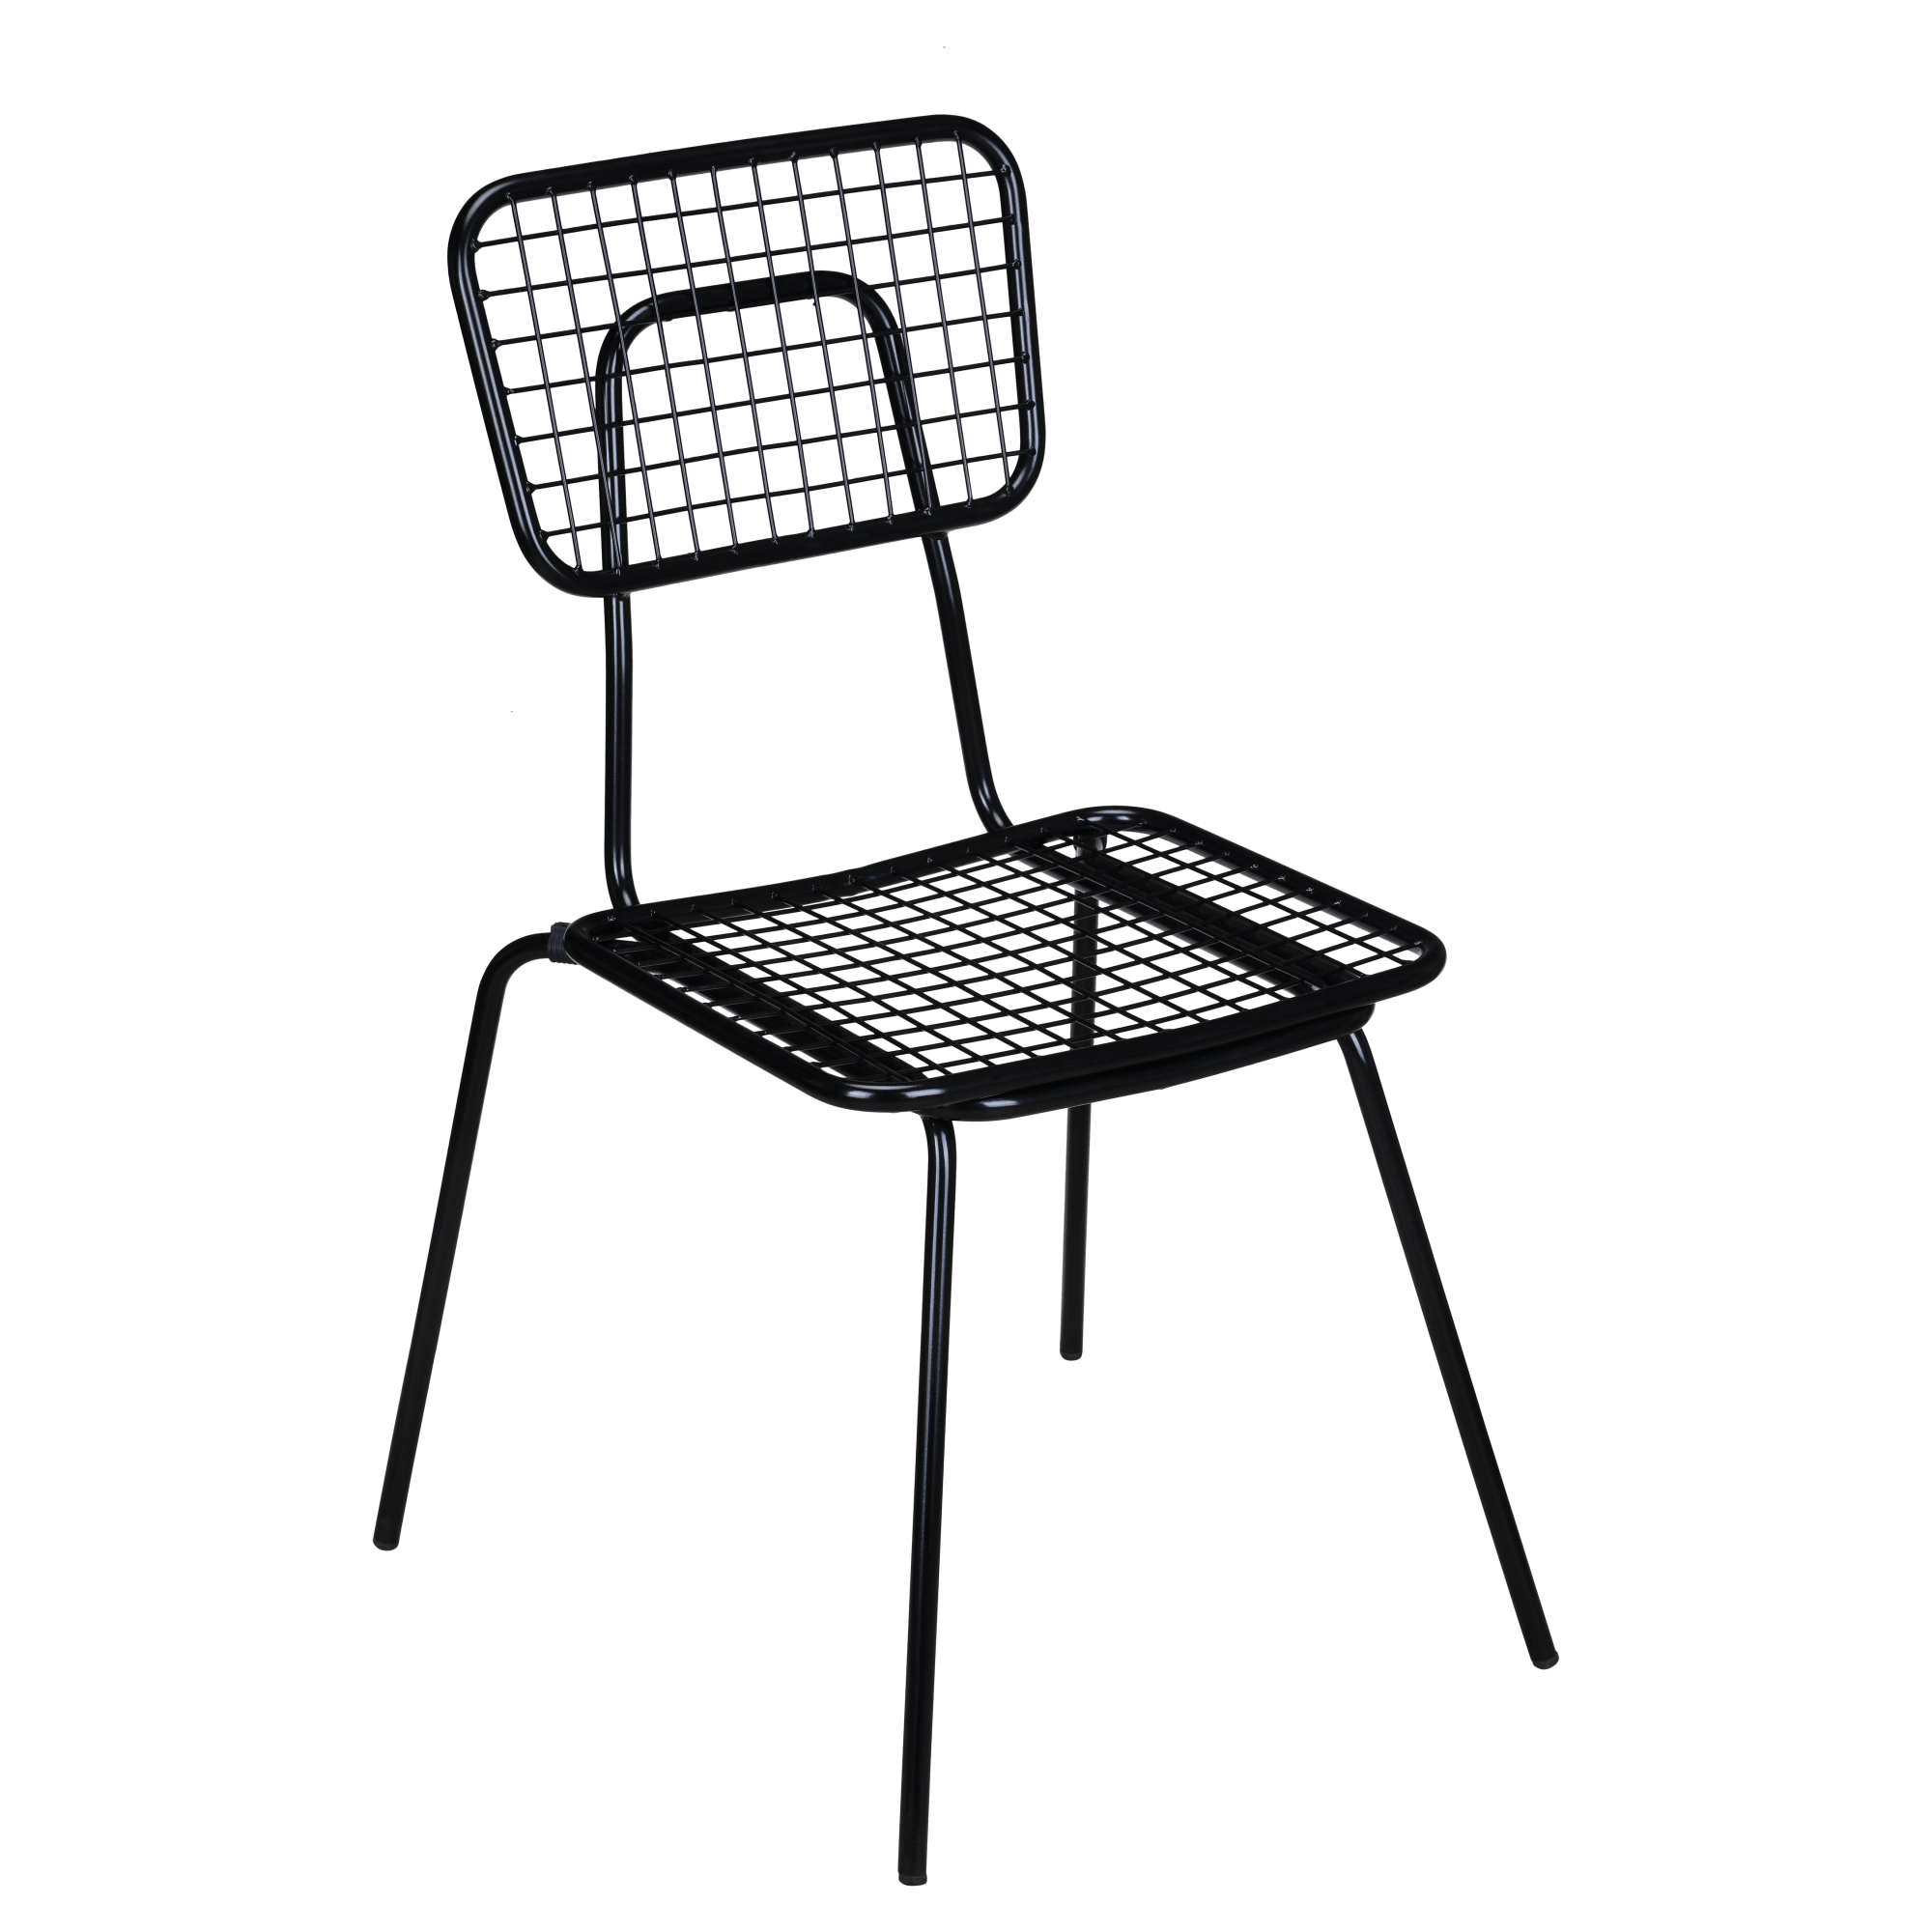 Ollie Patio Chair in Black Finish with Ollie Patio Chair in Black Finish